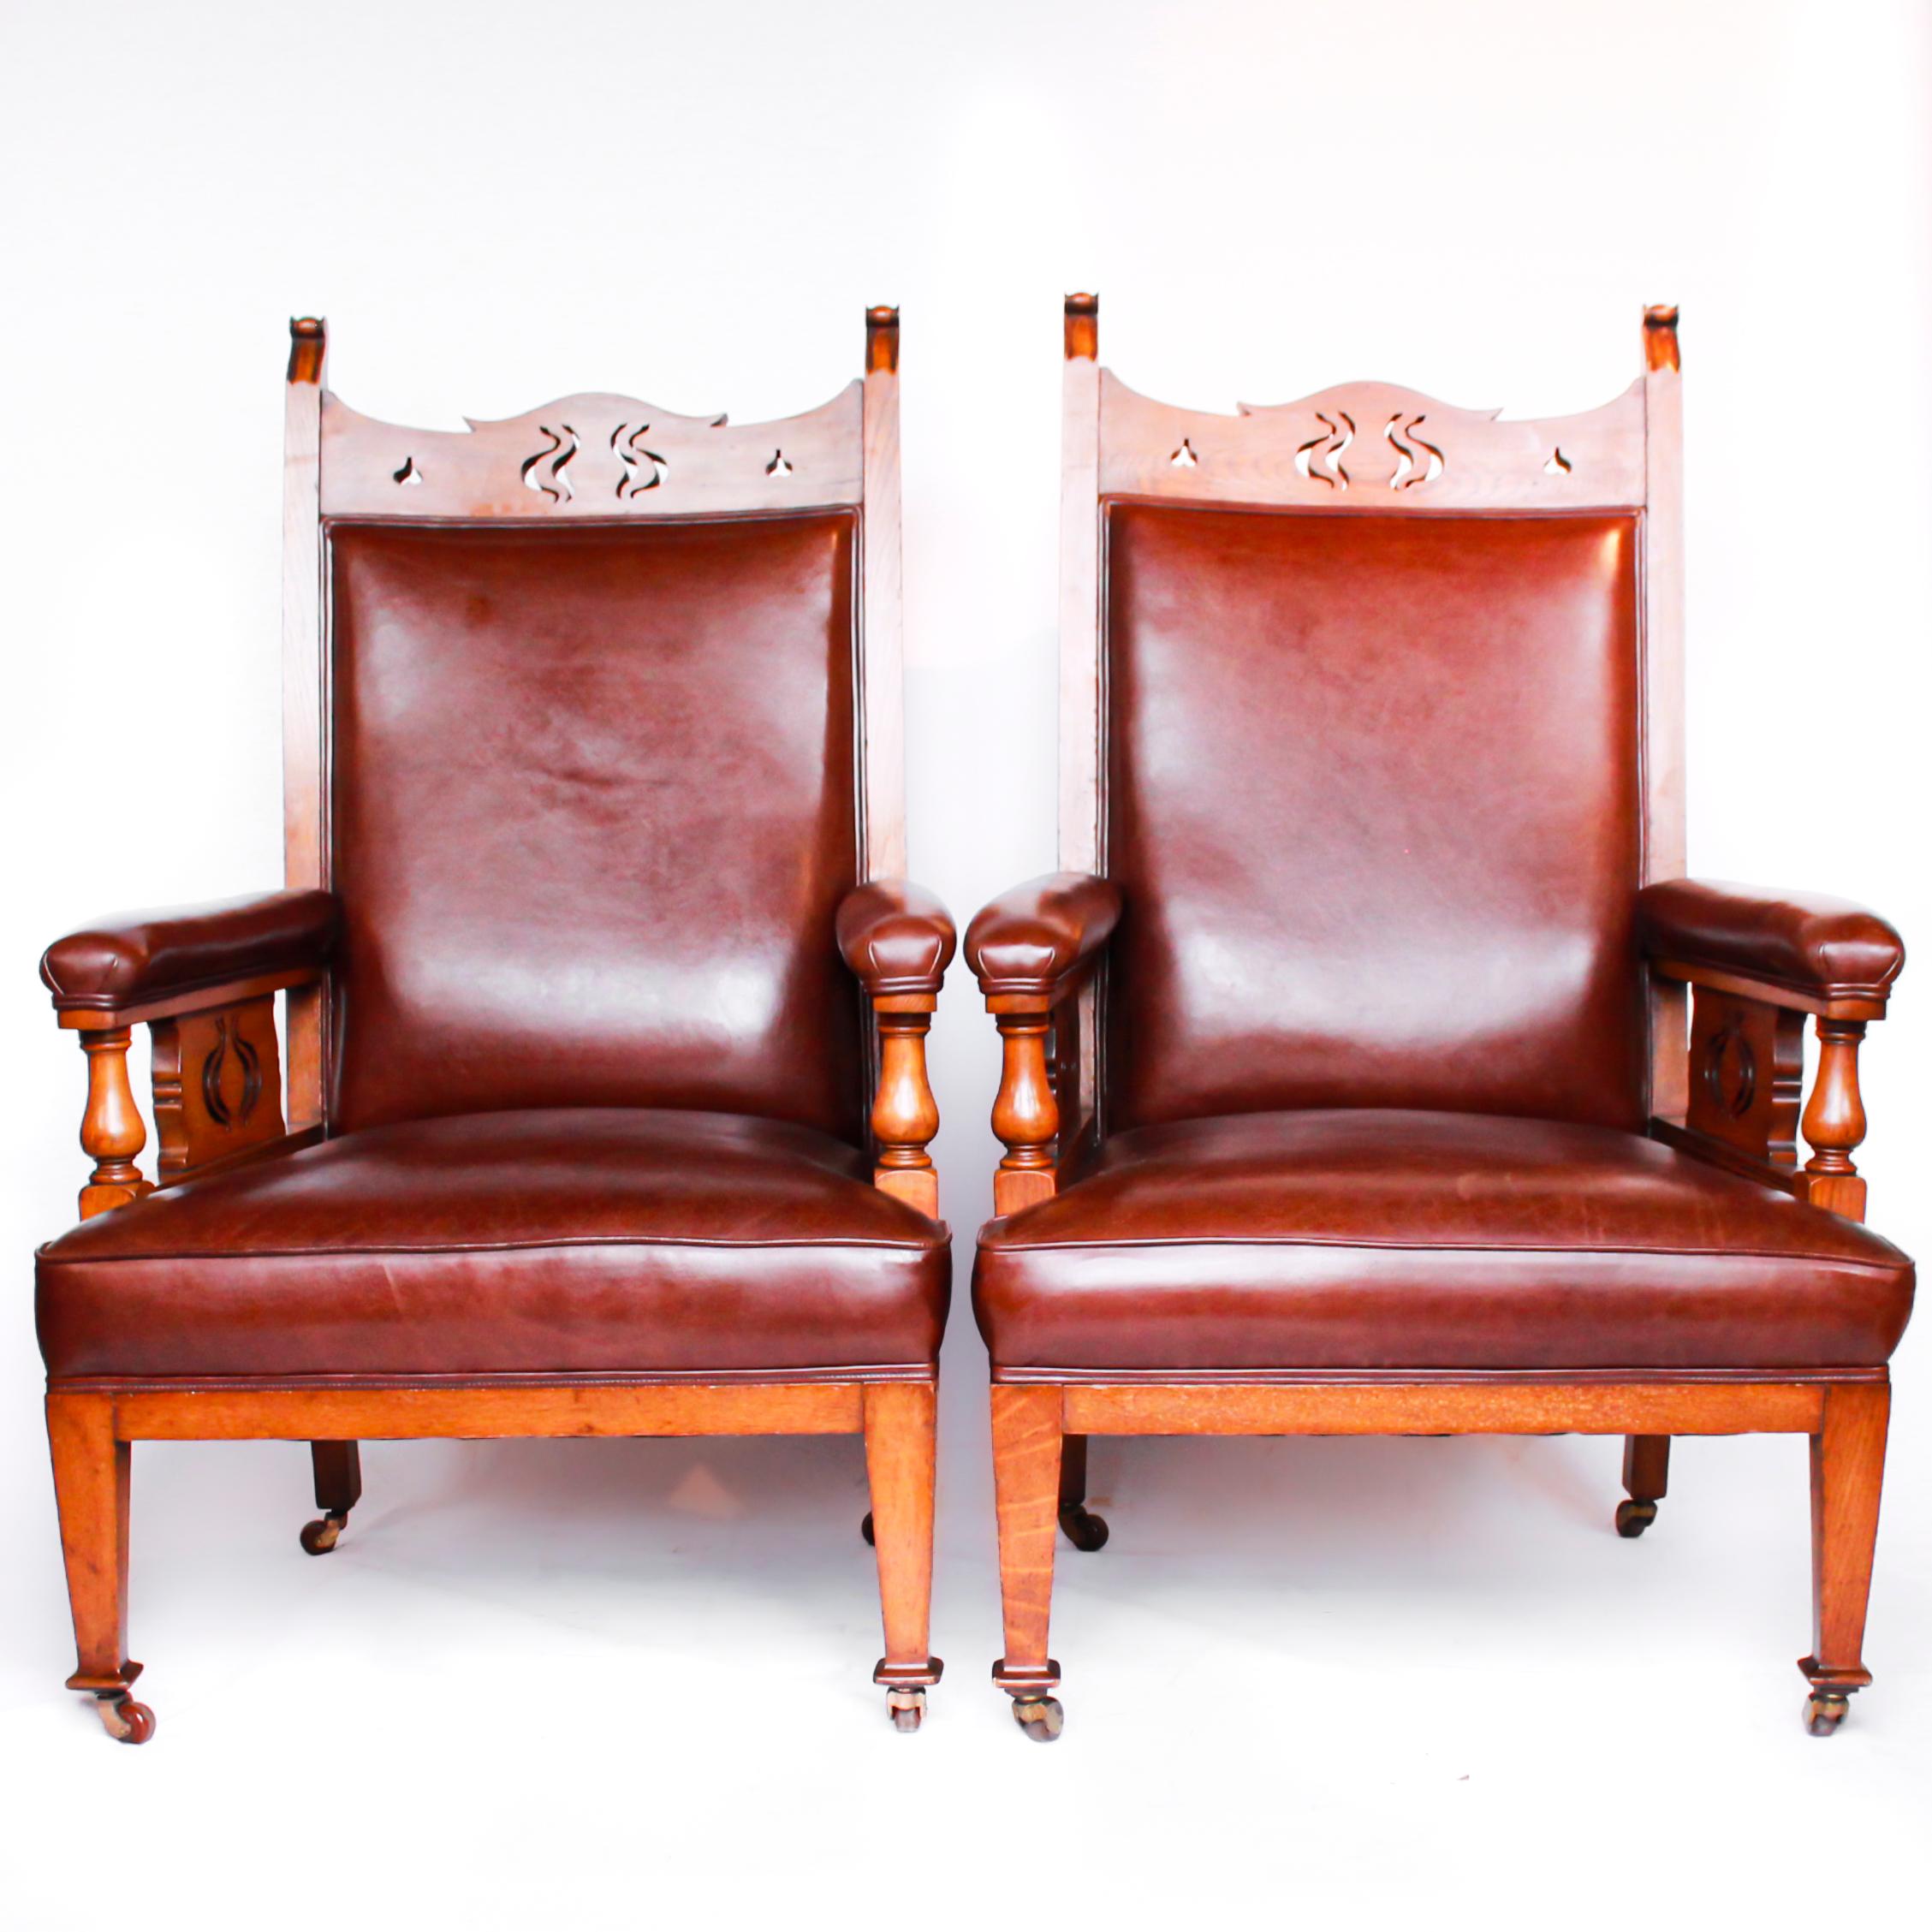 Arts and Crafts Pair of Arts & Craft's Library Chairs Solid Oak Upholstery in Chestnut Leather